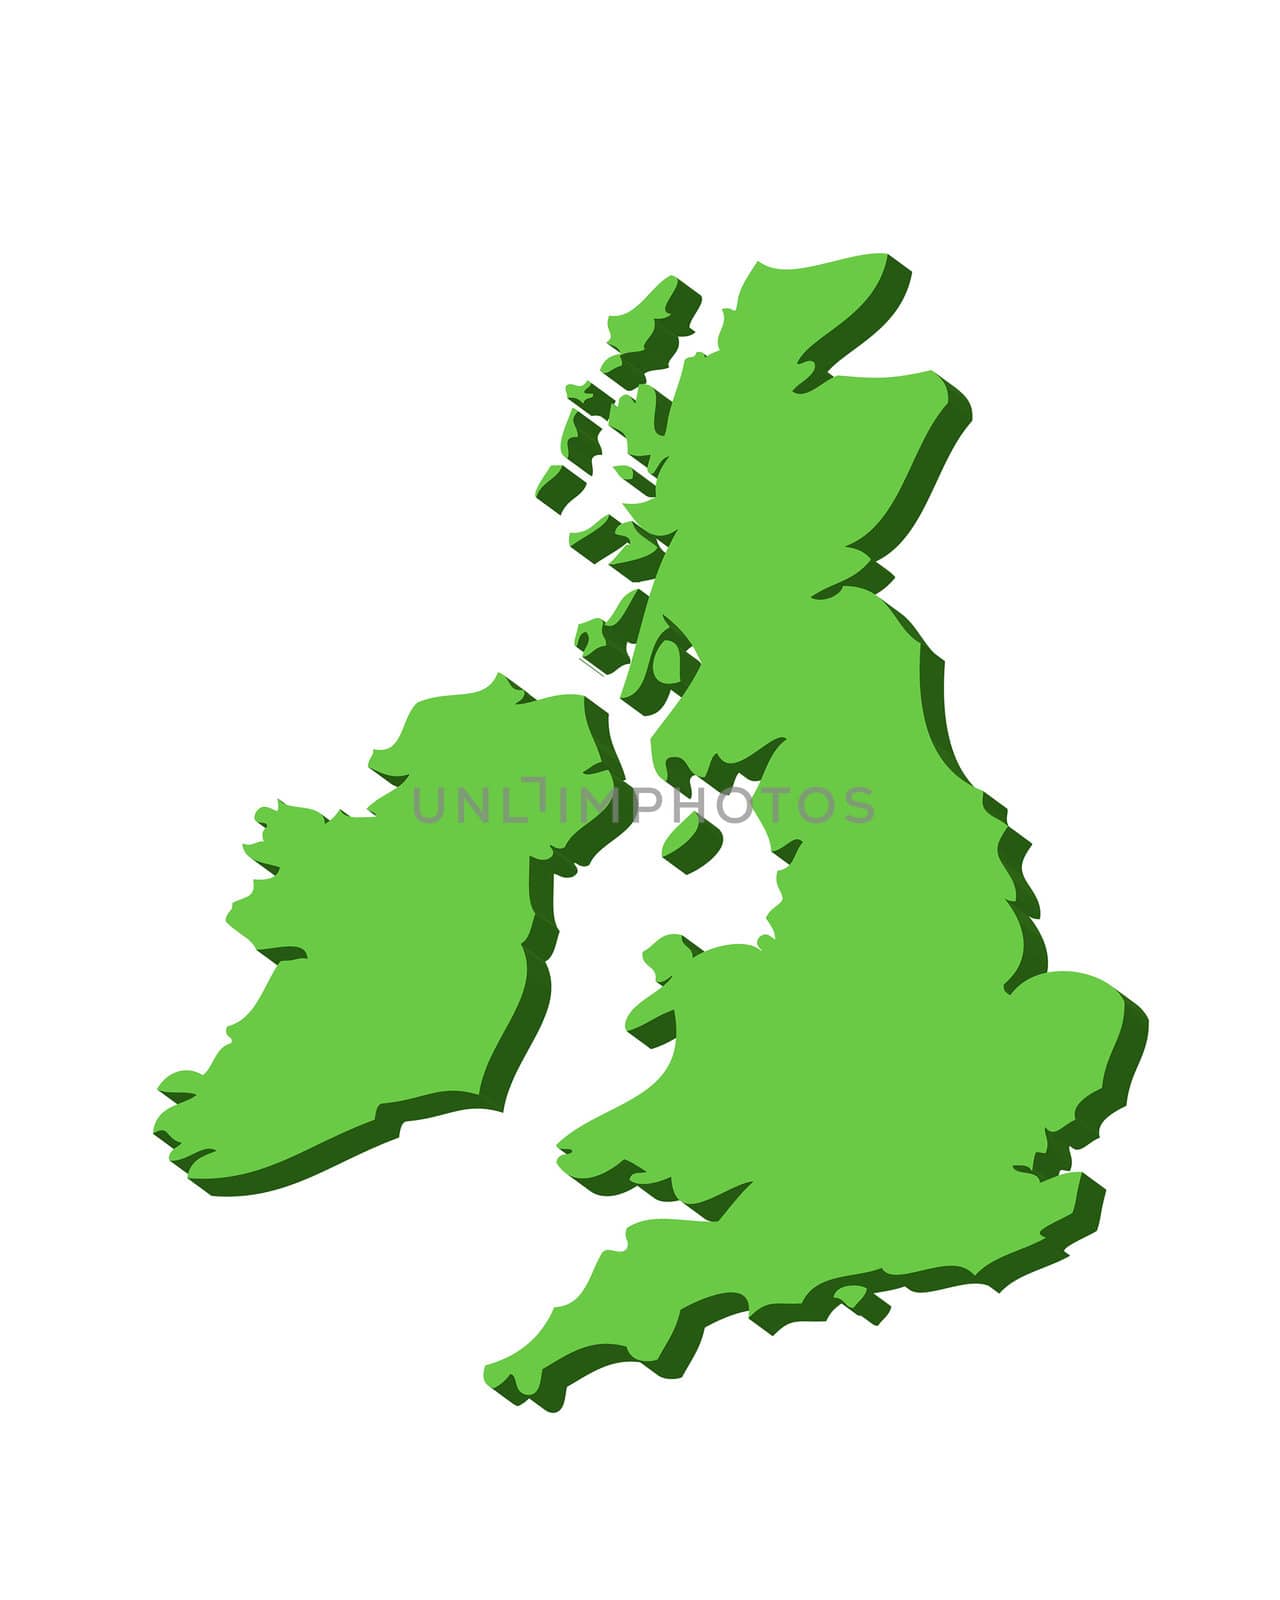 3D outline map of UK and Ireland in green